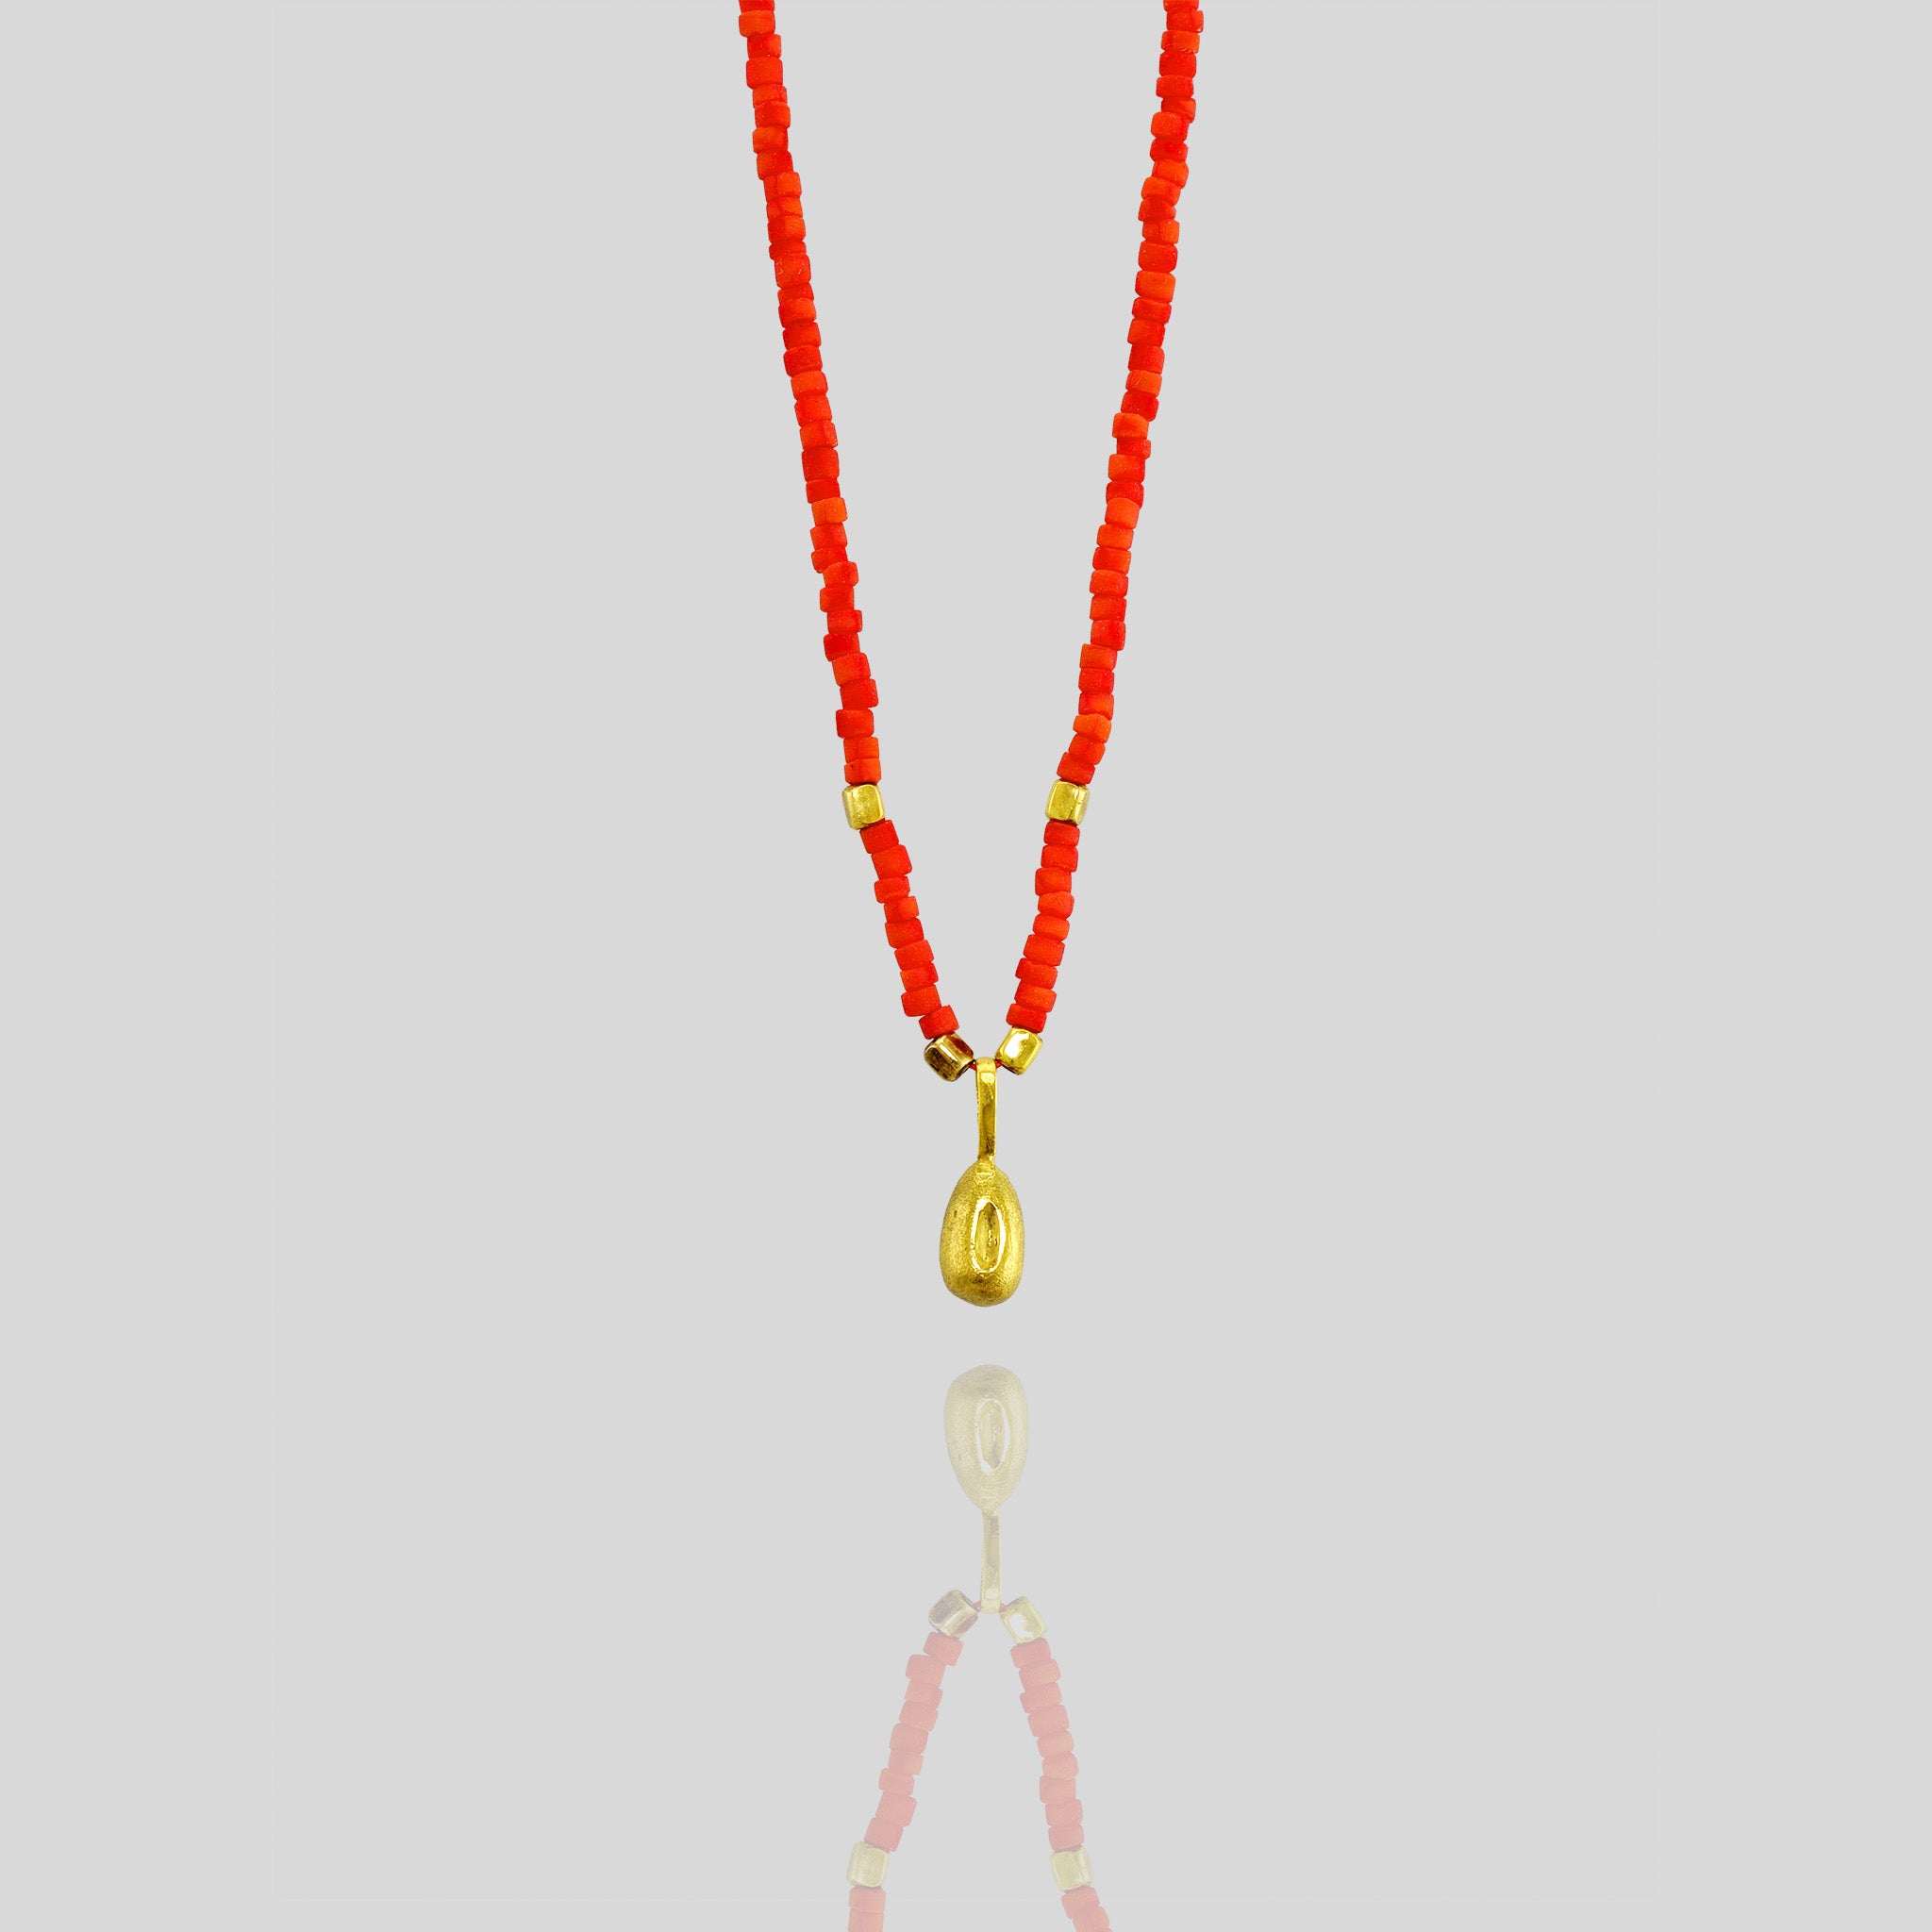 Playful and elegant Koral necklace with a natural gold seed charm, adding a colorful and mischievous touch to any outfit.